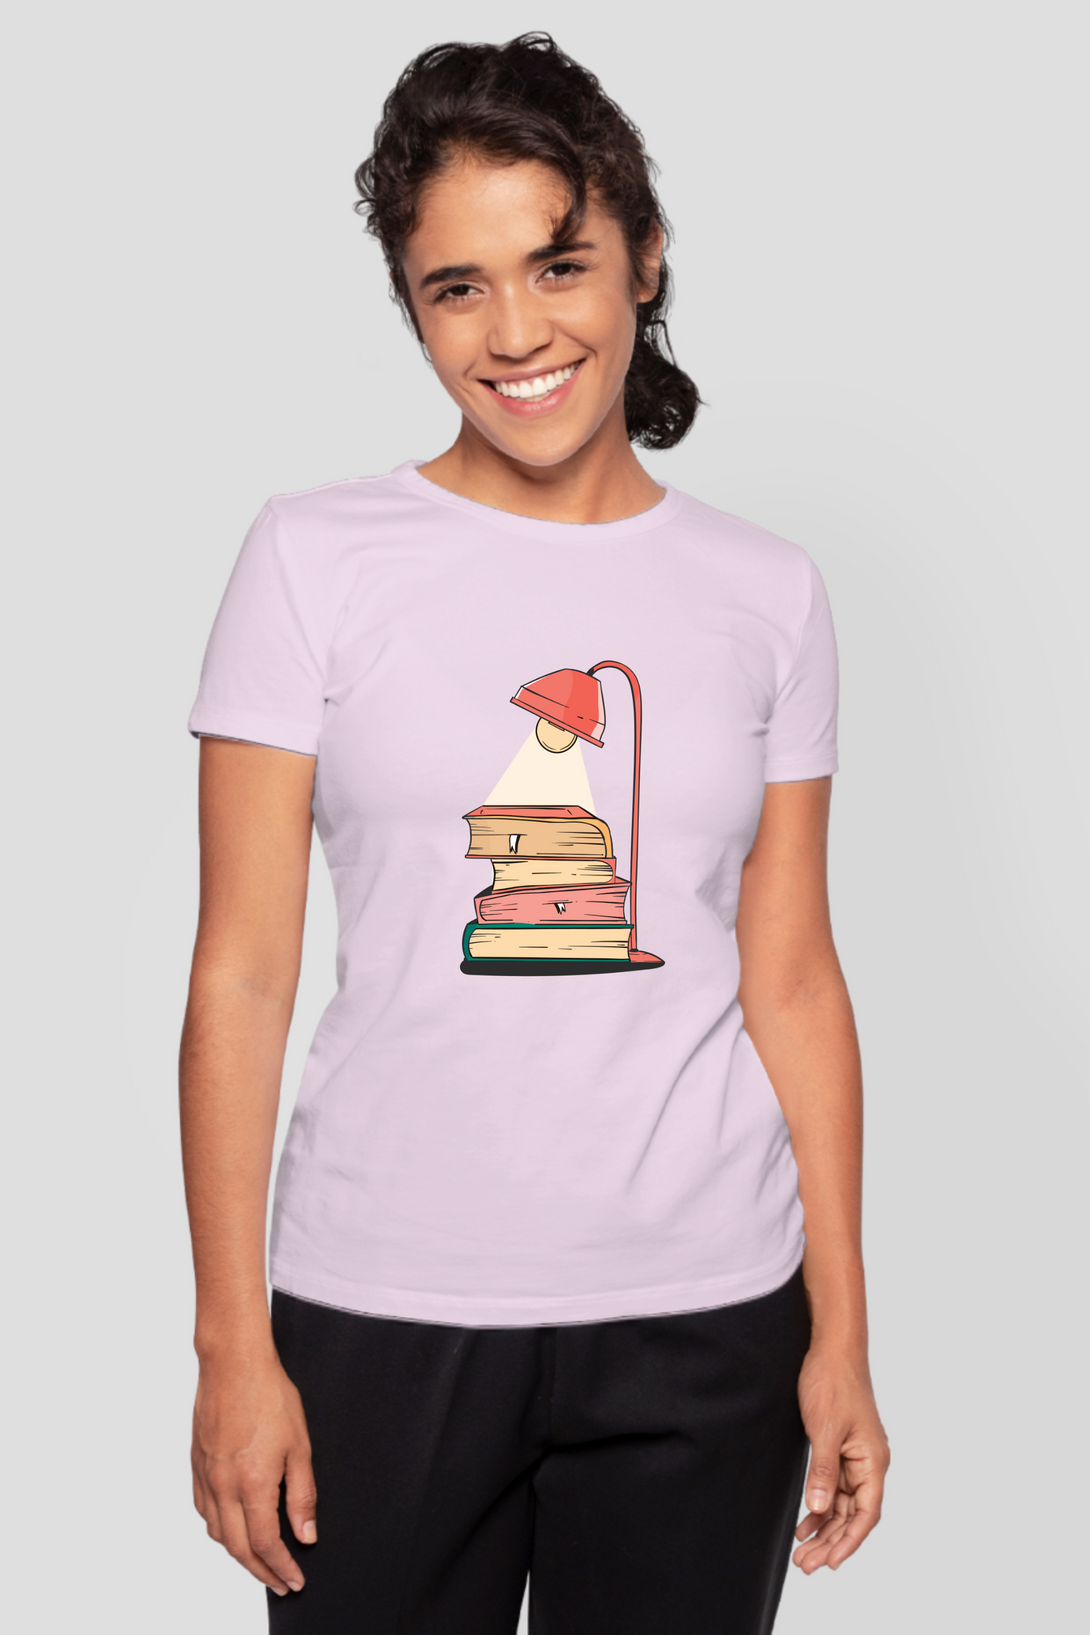 Lamp Of Knowledge Printed T-Shirt For Women - WowWaves - 10